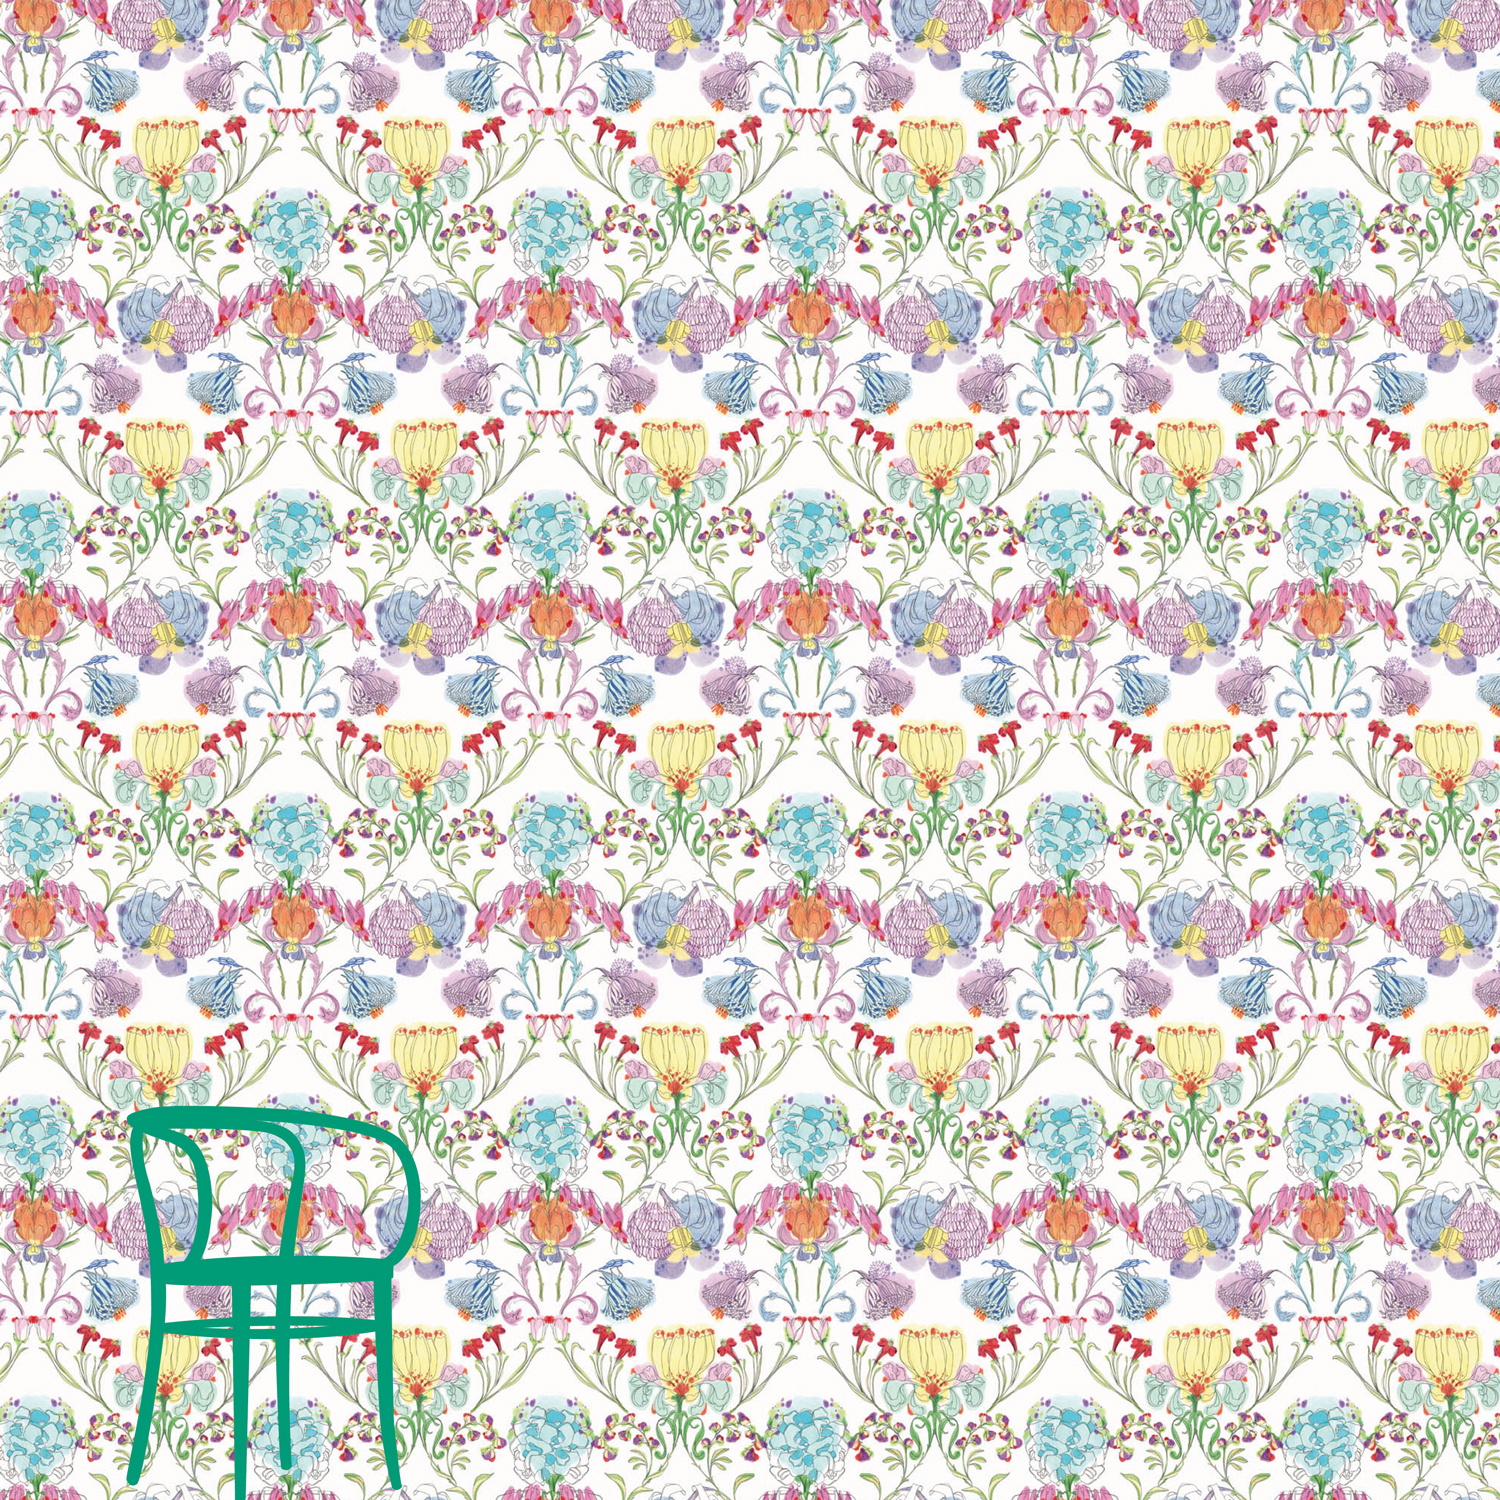 Francesca Colombo - wallcovering - wallpapers - thonet - studio consultancy - made in Italy - soft colors - modern ornamental - decoration - art director